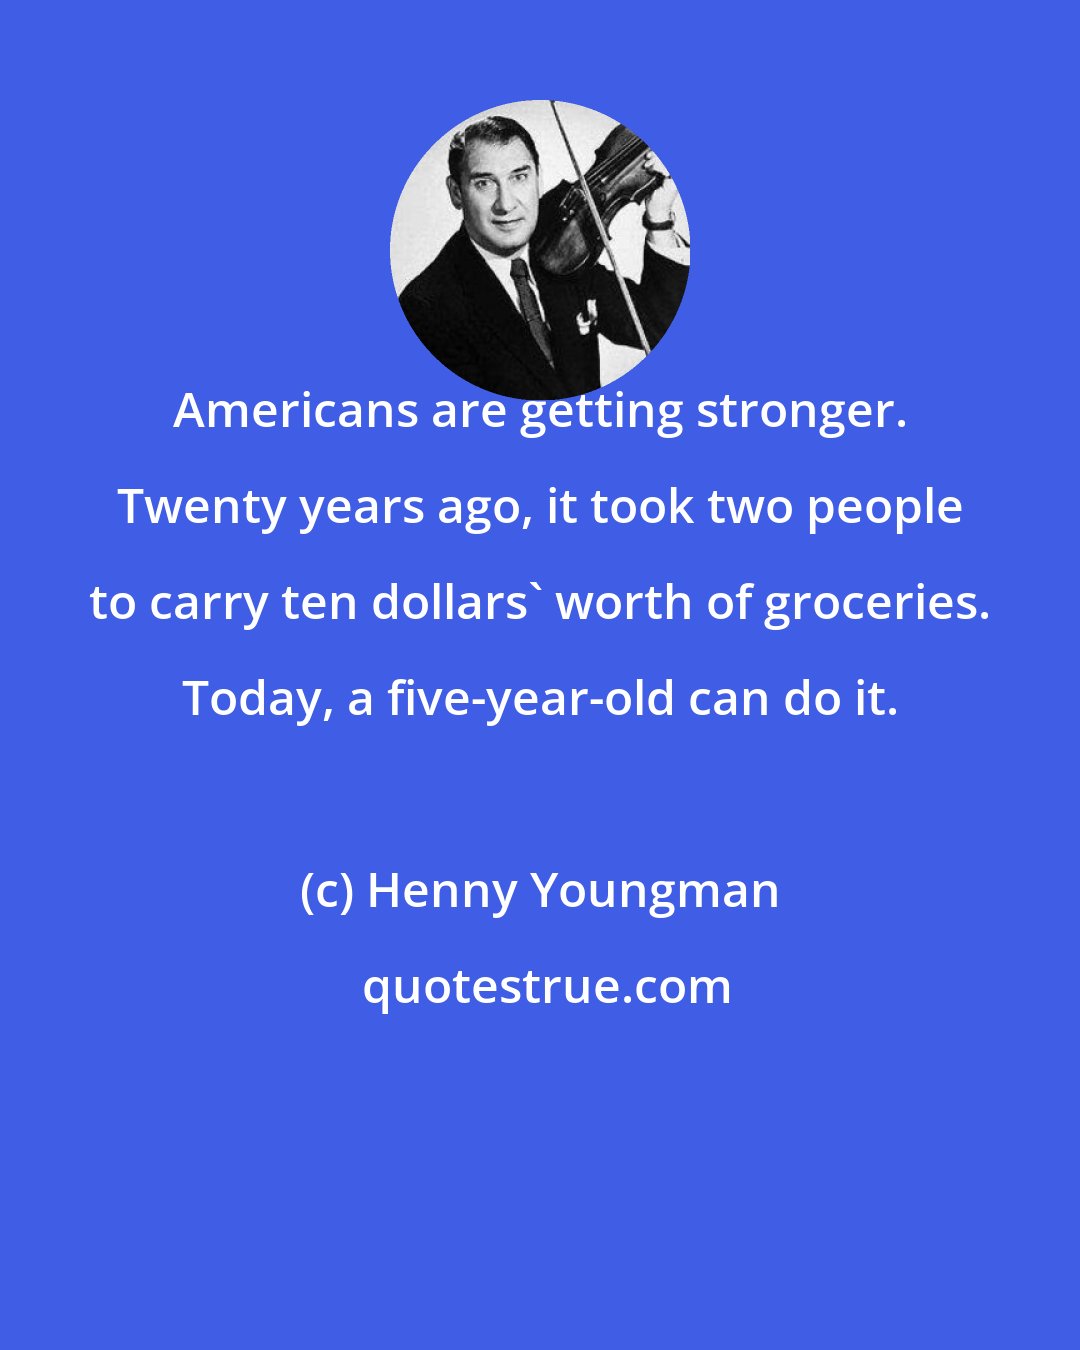 Henny Youngman: Americans are getting stronger. Twenty years ago, it took two people to carry ten dollars' worth of groceries. Today, a five-year-old can do it.